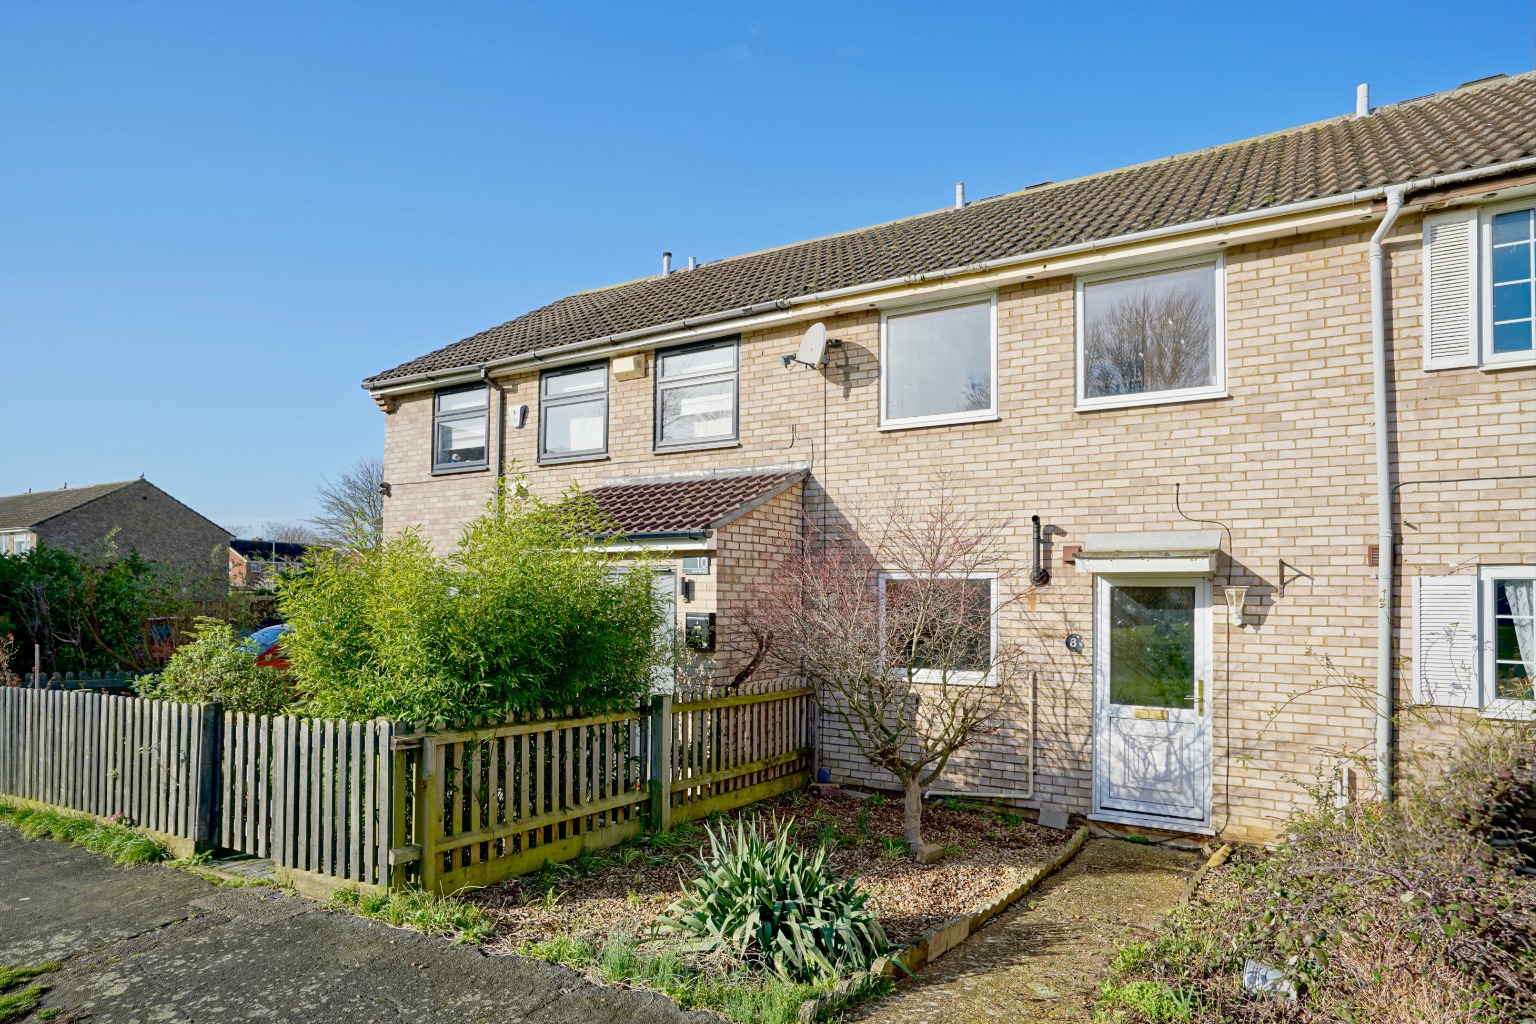 3 bed terraced house for sale in Ilex Road, St Ives - Property Image 1